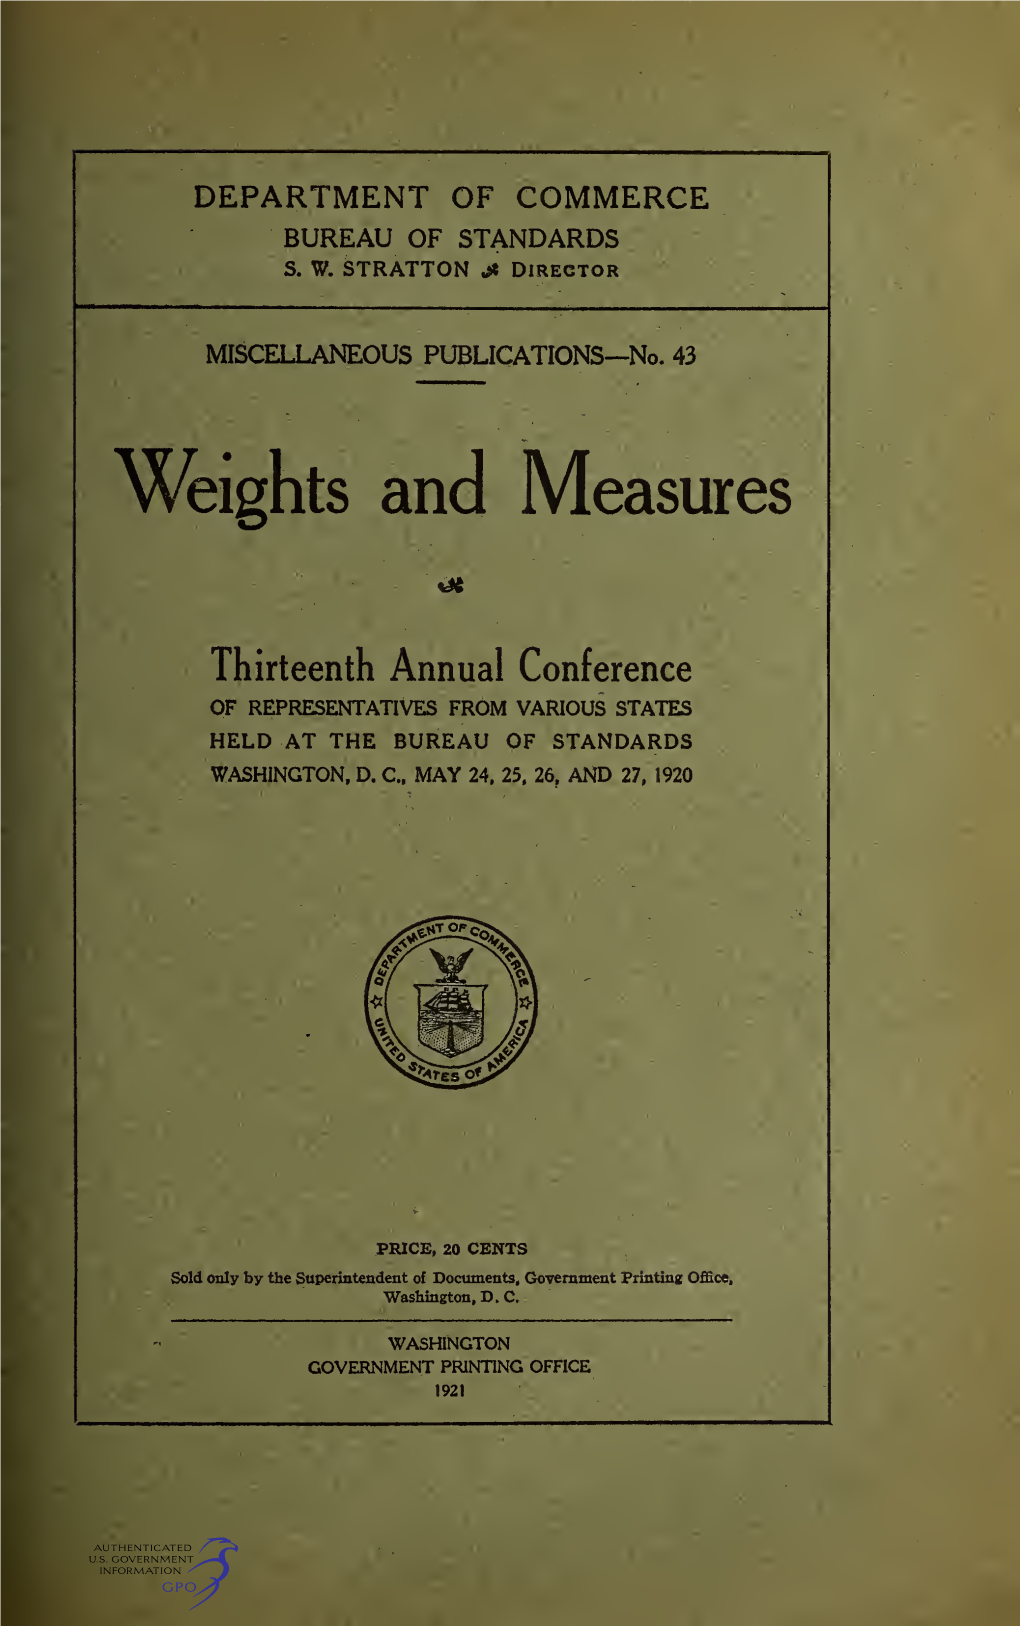 Weights and Measures Thirteenth Annual Conference